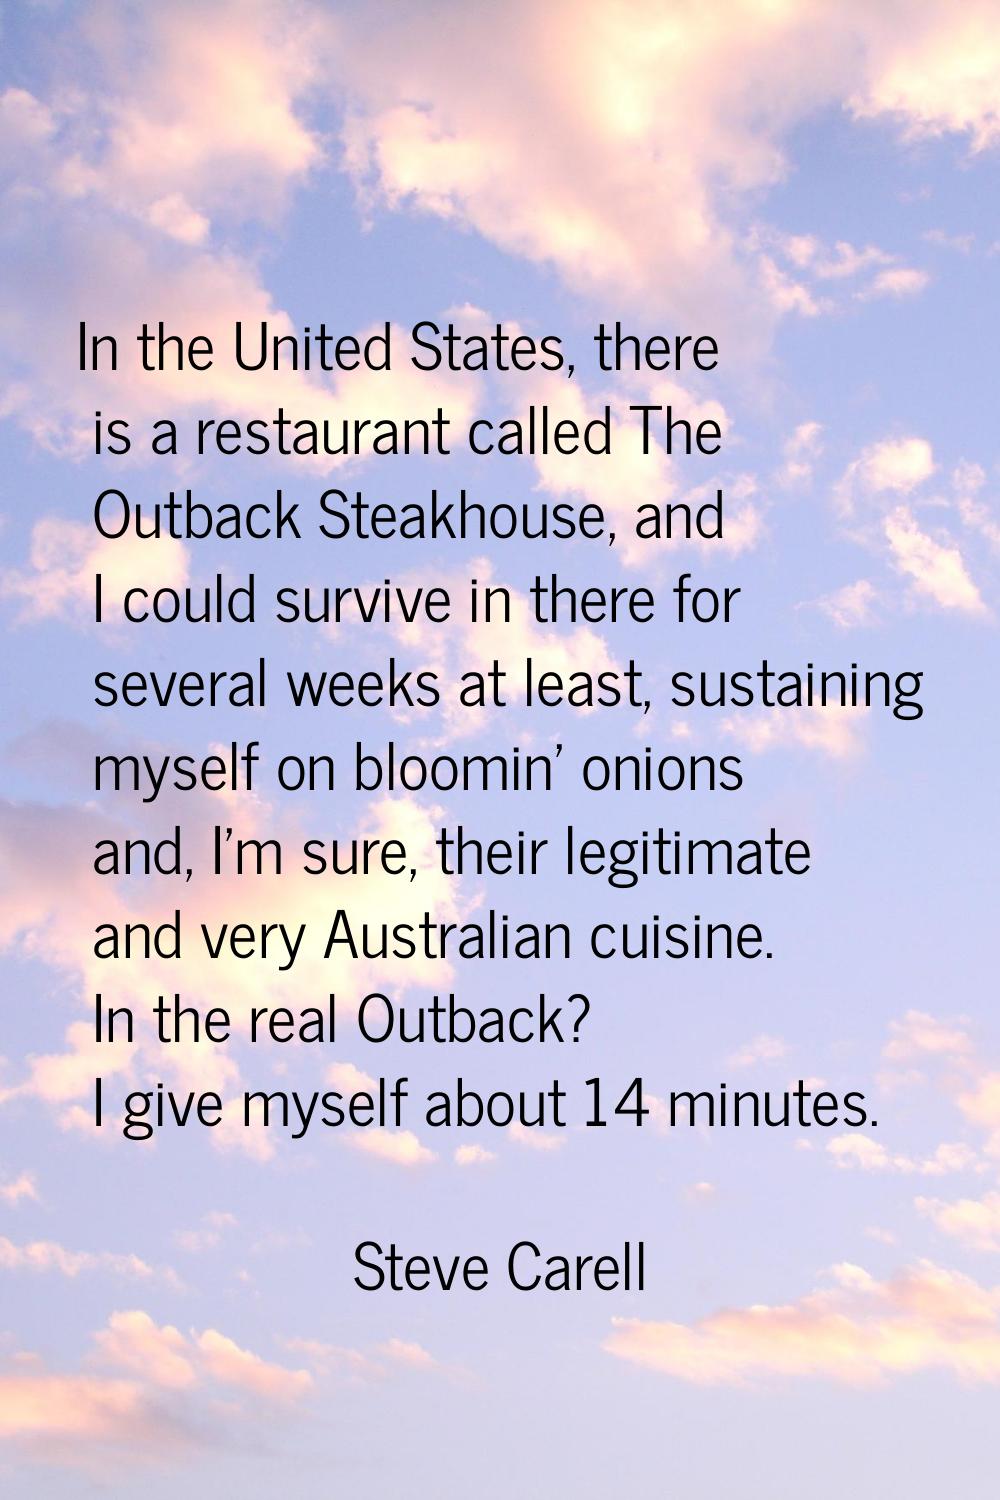 In the United States, there is a restaurant called The Outback Steakhouse, and I could survive in t